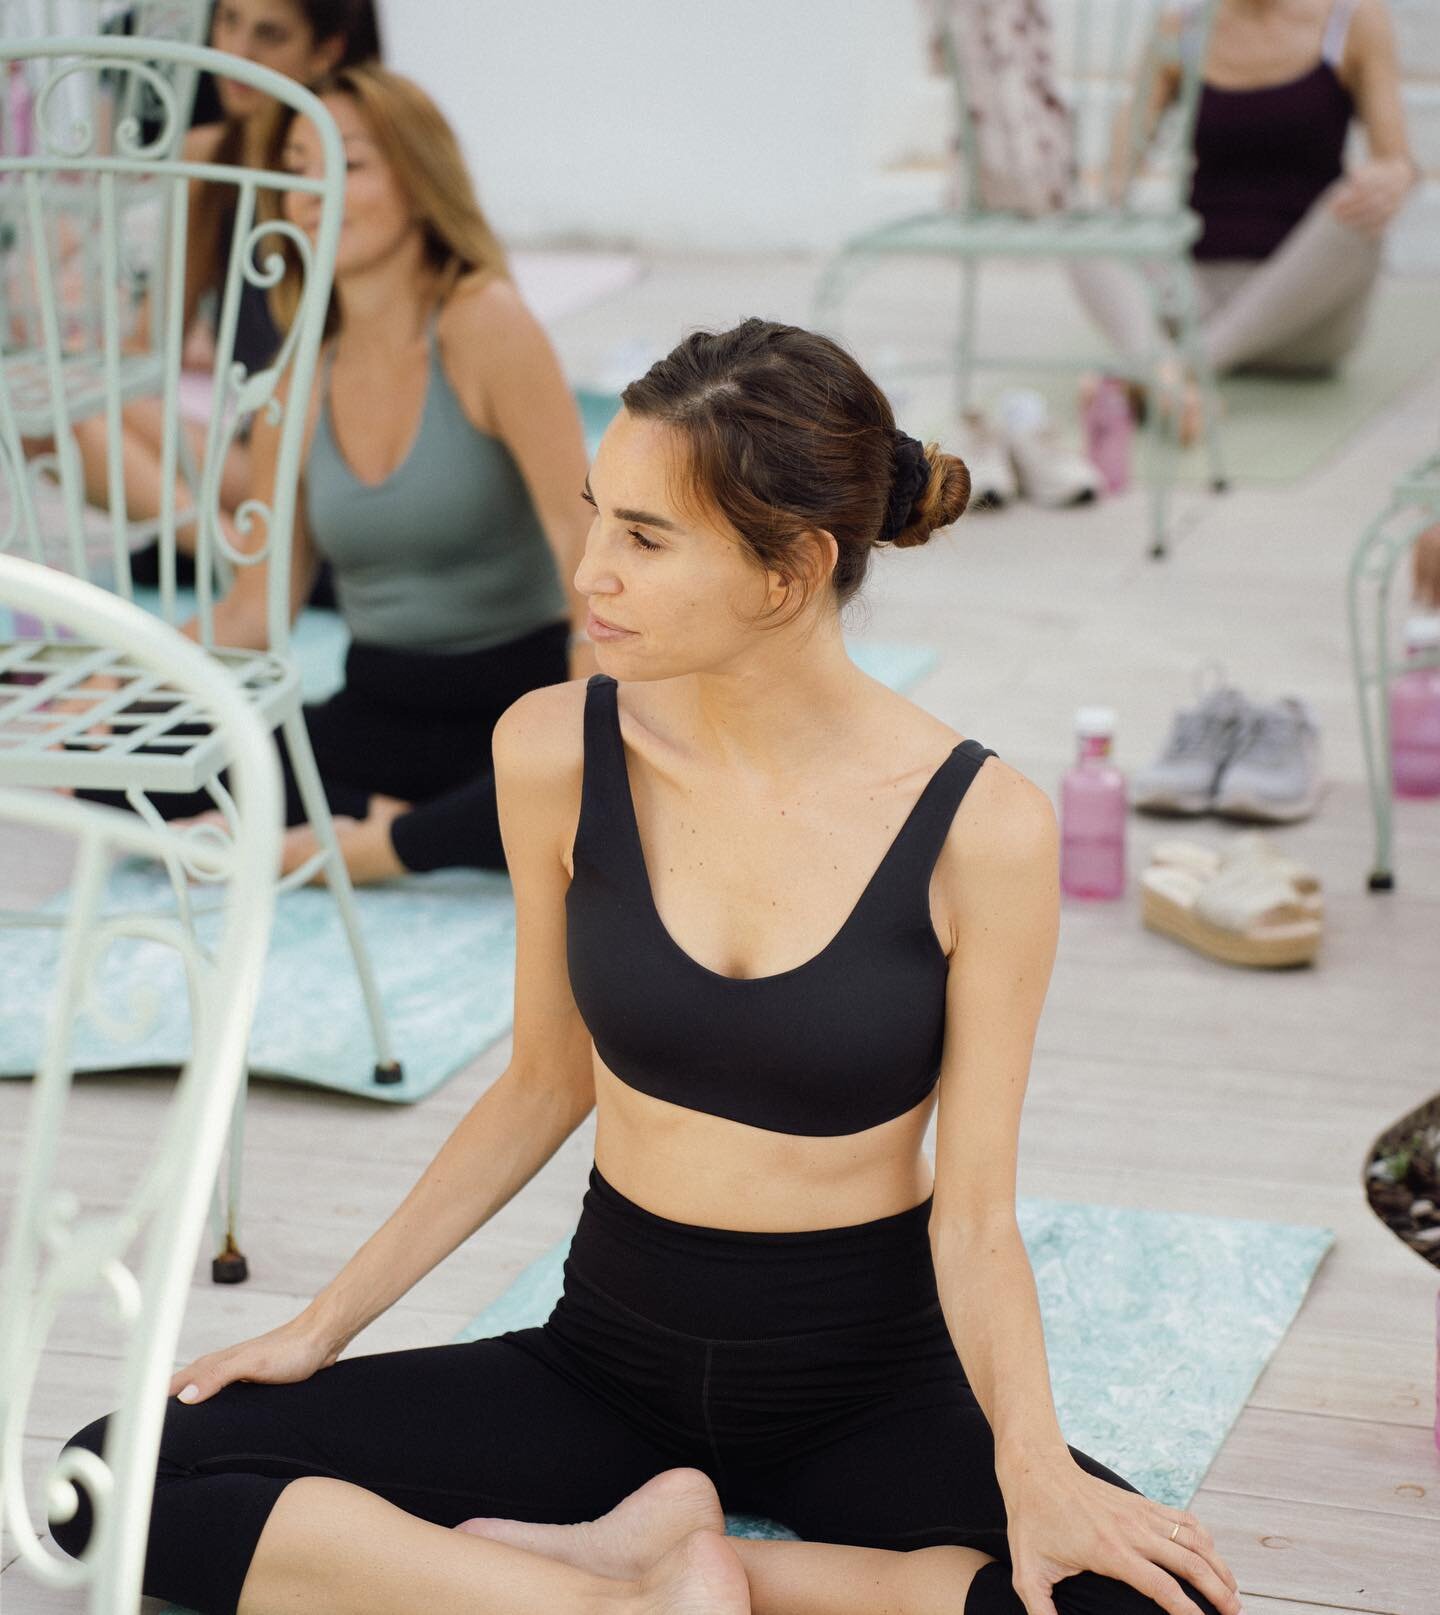 🗓️ This SATURDAY the 15 th  connect with yourself at an amazing yoga class followed by amazing Brunch at Rachel&rsquo;s eco Love 
ARE YOU READY ?
Book your spot for the best plan of summer 
You don&rsquo;t wanna miss out - Tickets out  Now in our bi